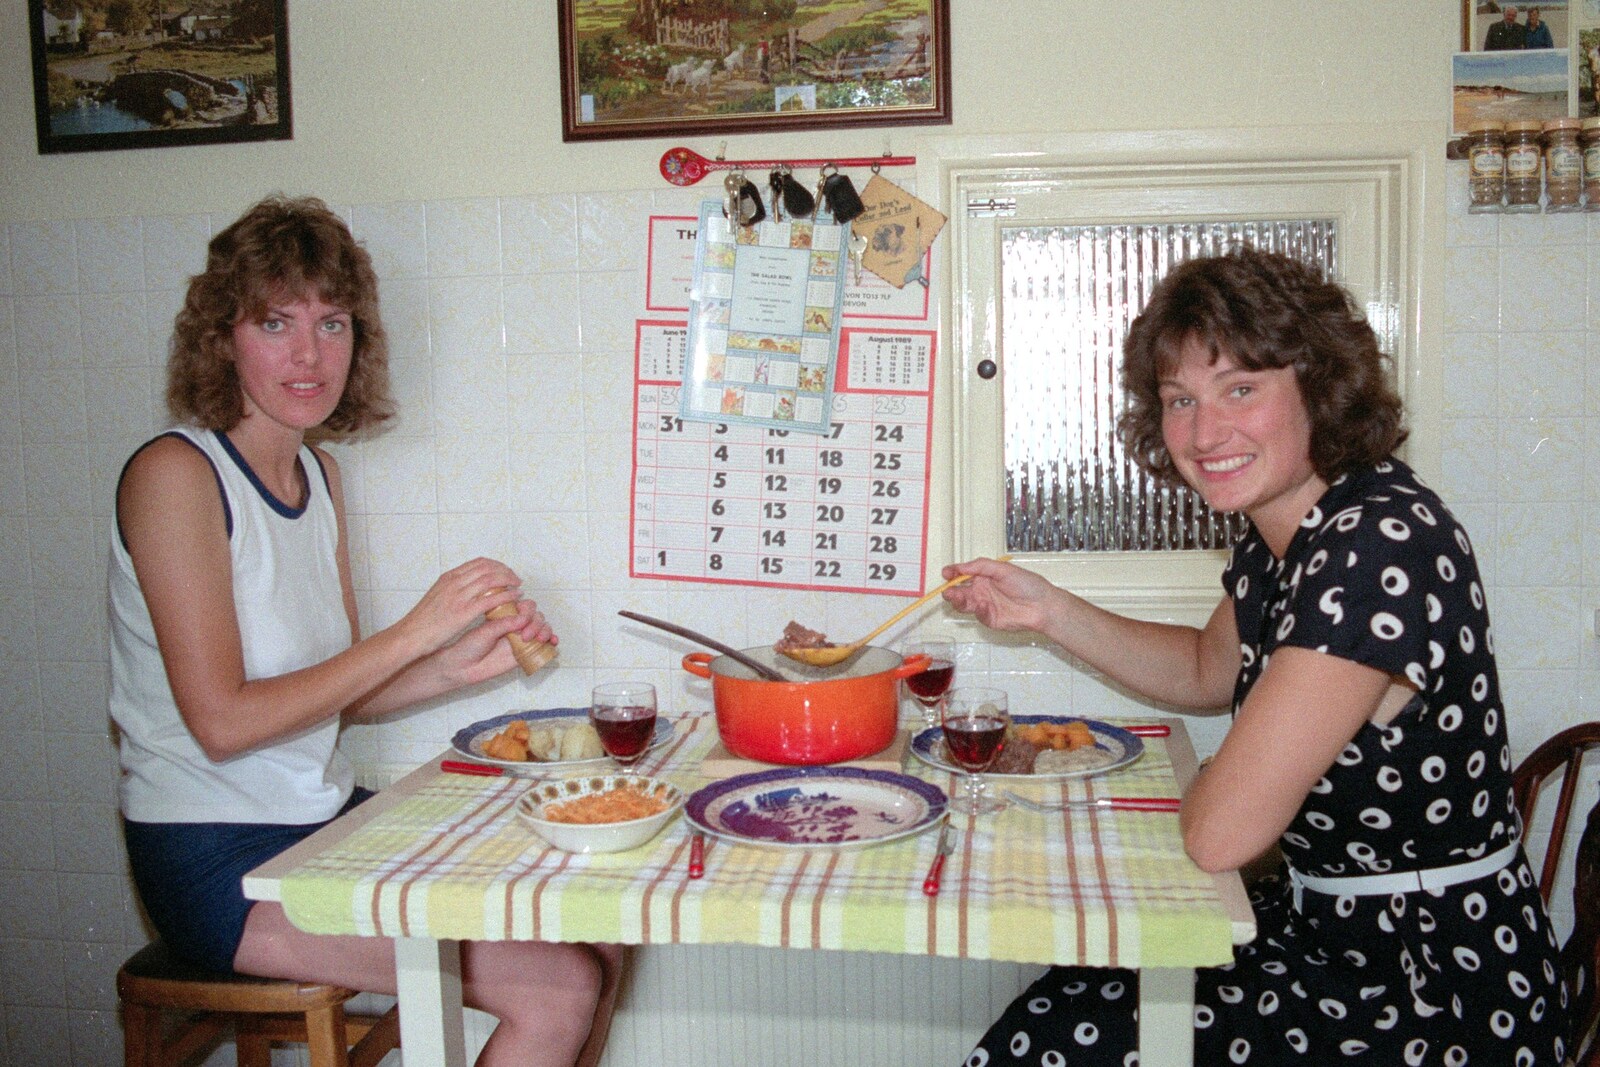 We have a spot of lunch from Uni: A Trip to the Riviera and Oberon Gets New Shoes, Torquay and Harbertonford, Devon - 3rd July 1989